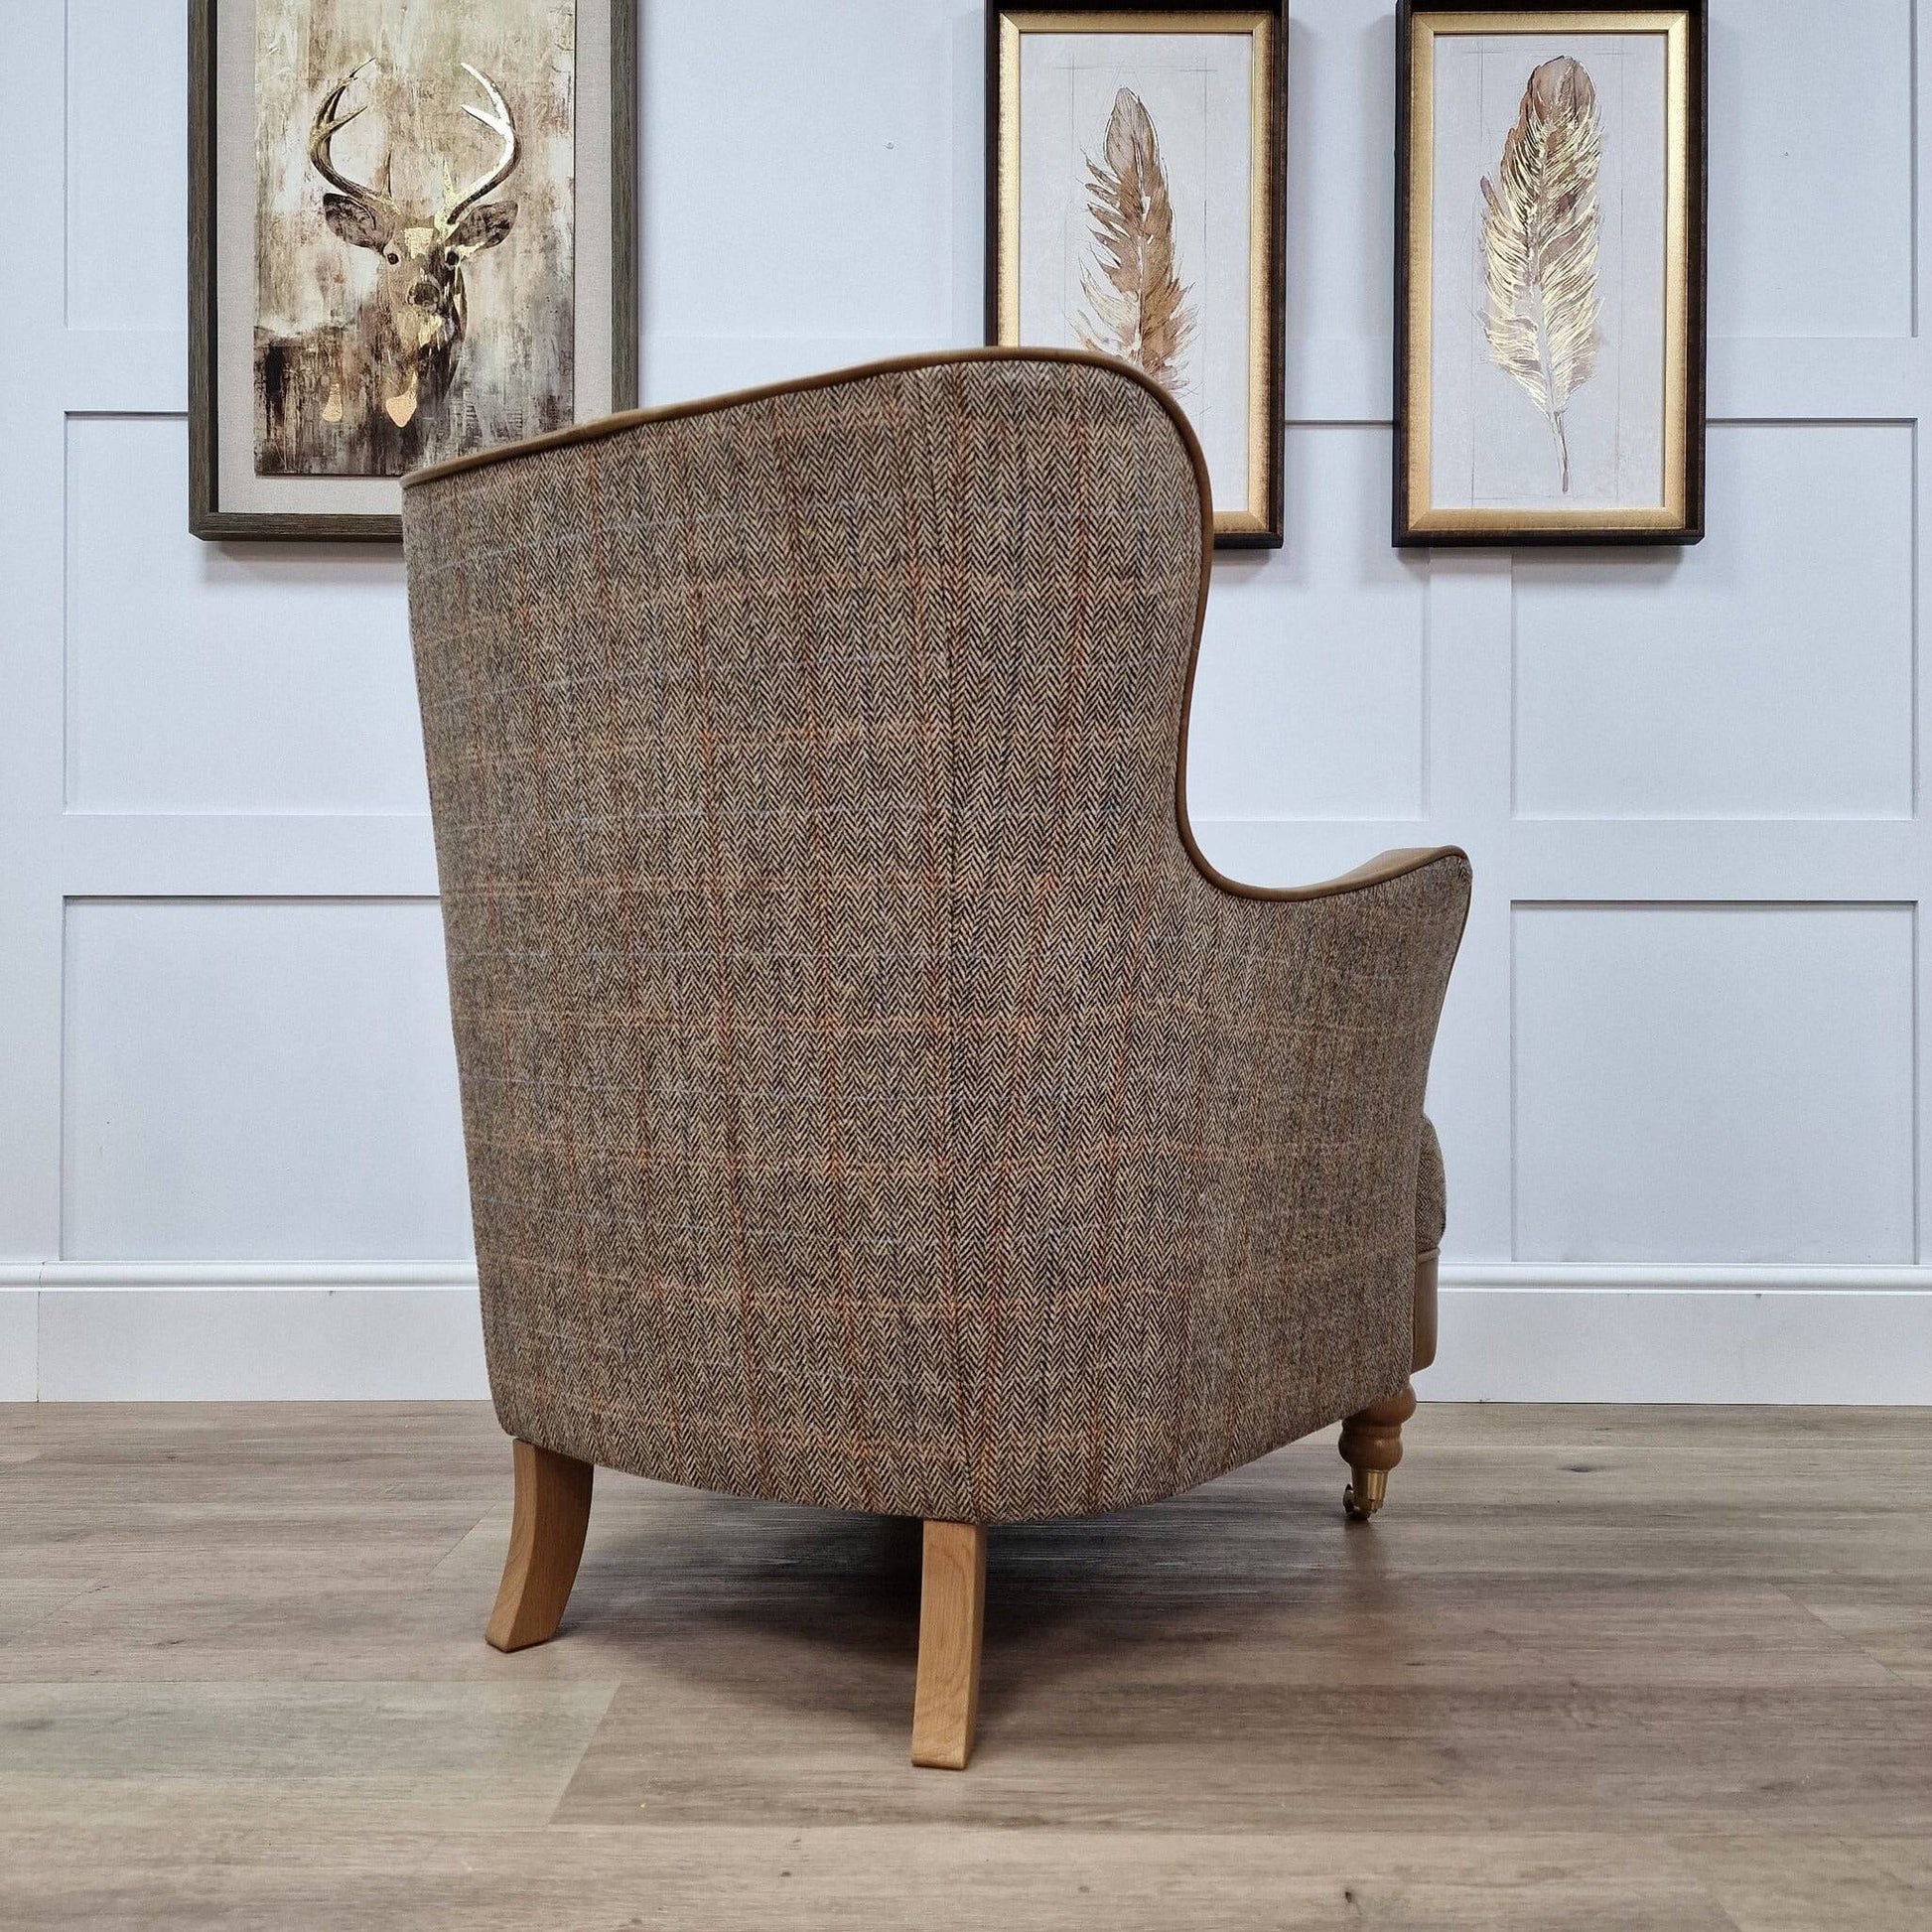 Autumn Woodland Harris Tweed & Leather Relax Chair - Alness - Chairs - Rydan Interiors